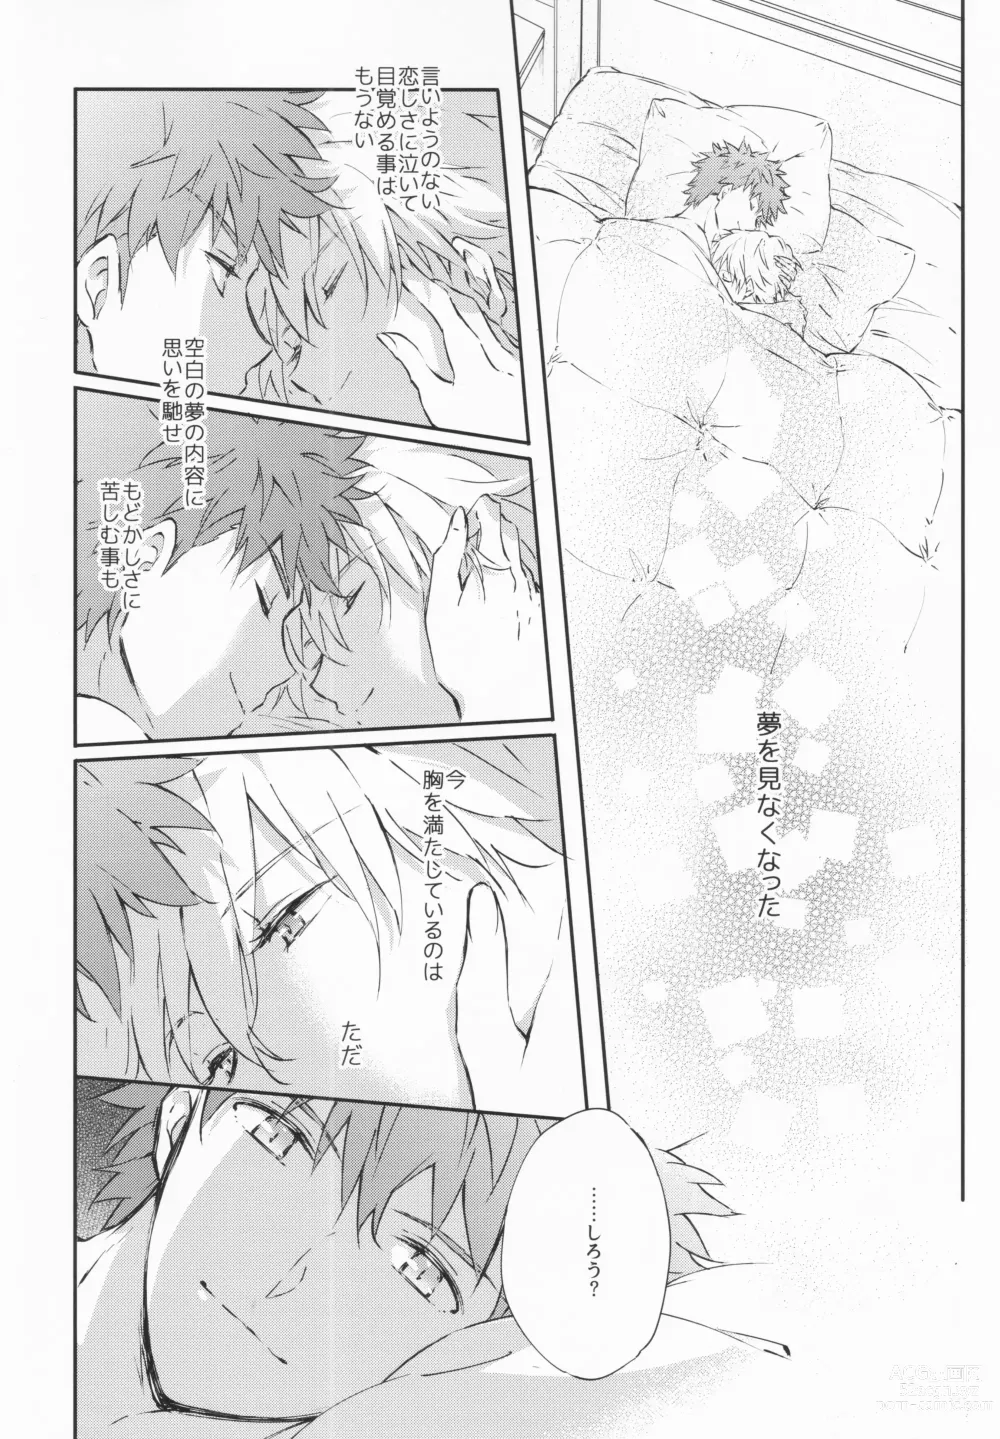 Page 3 of doujinshi STARDUST LOVESONG encore special story 1st After 7 Days